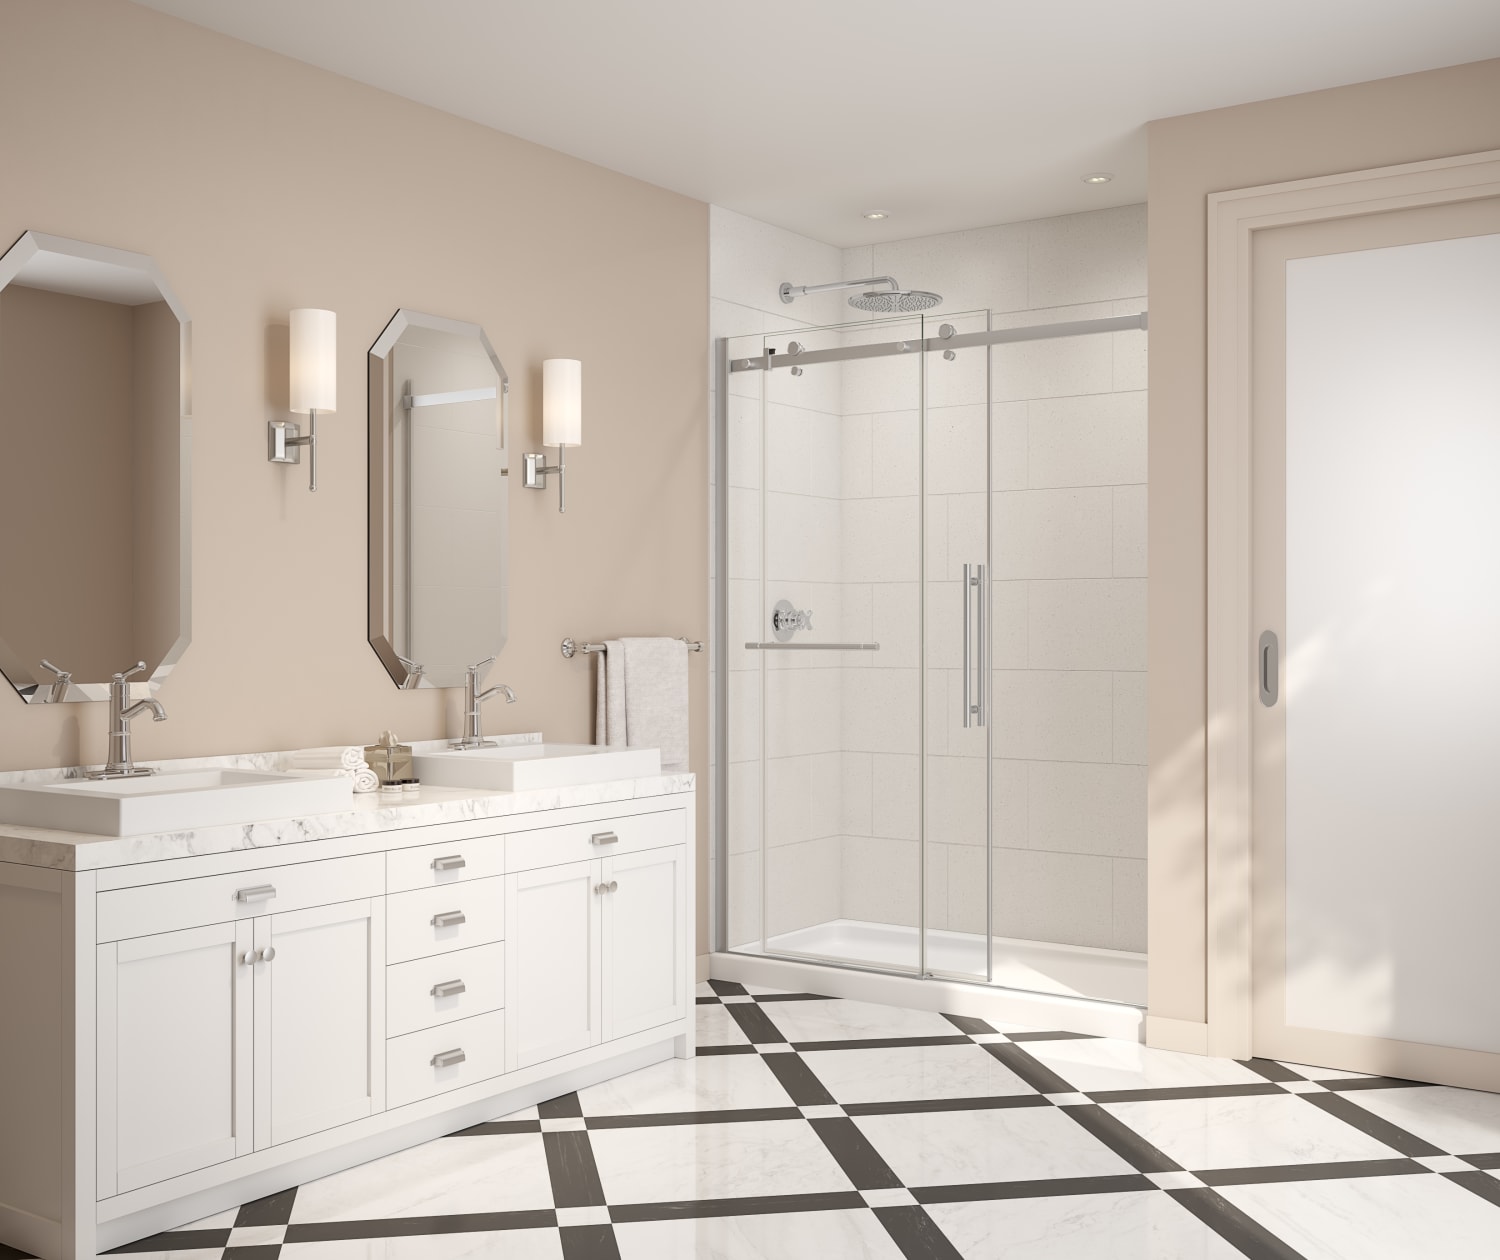 https://res.cloudinary.com/american-bath-group/image/upload/t_plp_pdp_product_image/v1666204577/abg-graphics/original-images/swan/shower-walls/deco/jpeg-rgb/traditional-subway-tile/swan-trad-subway-birch-2-vessel-wh-deco.jpg